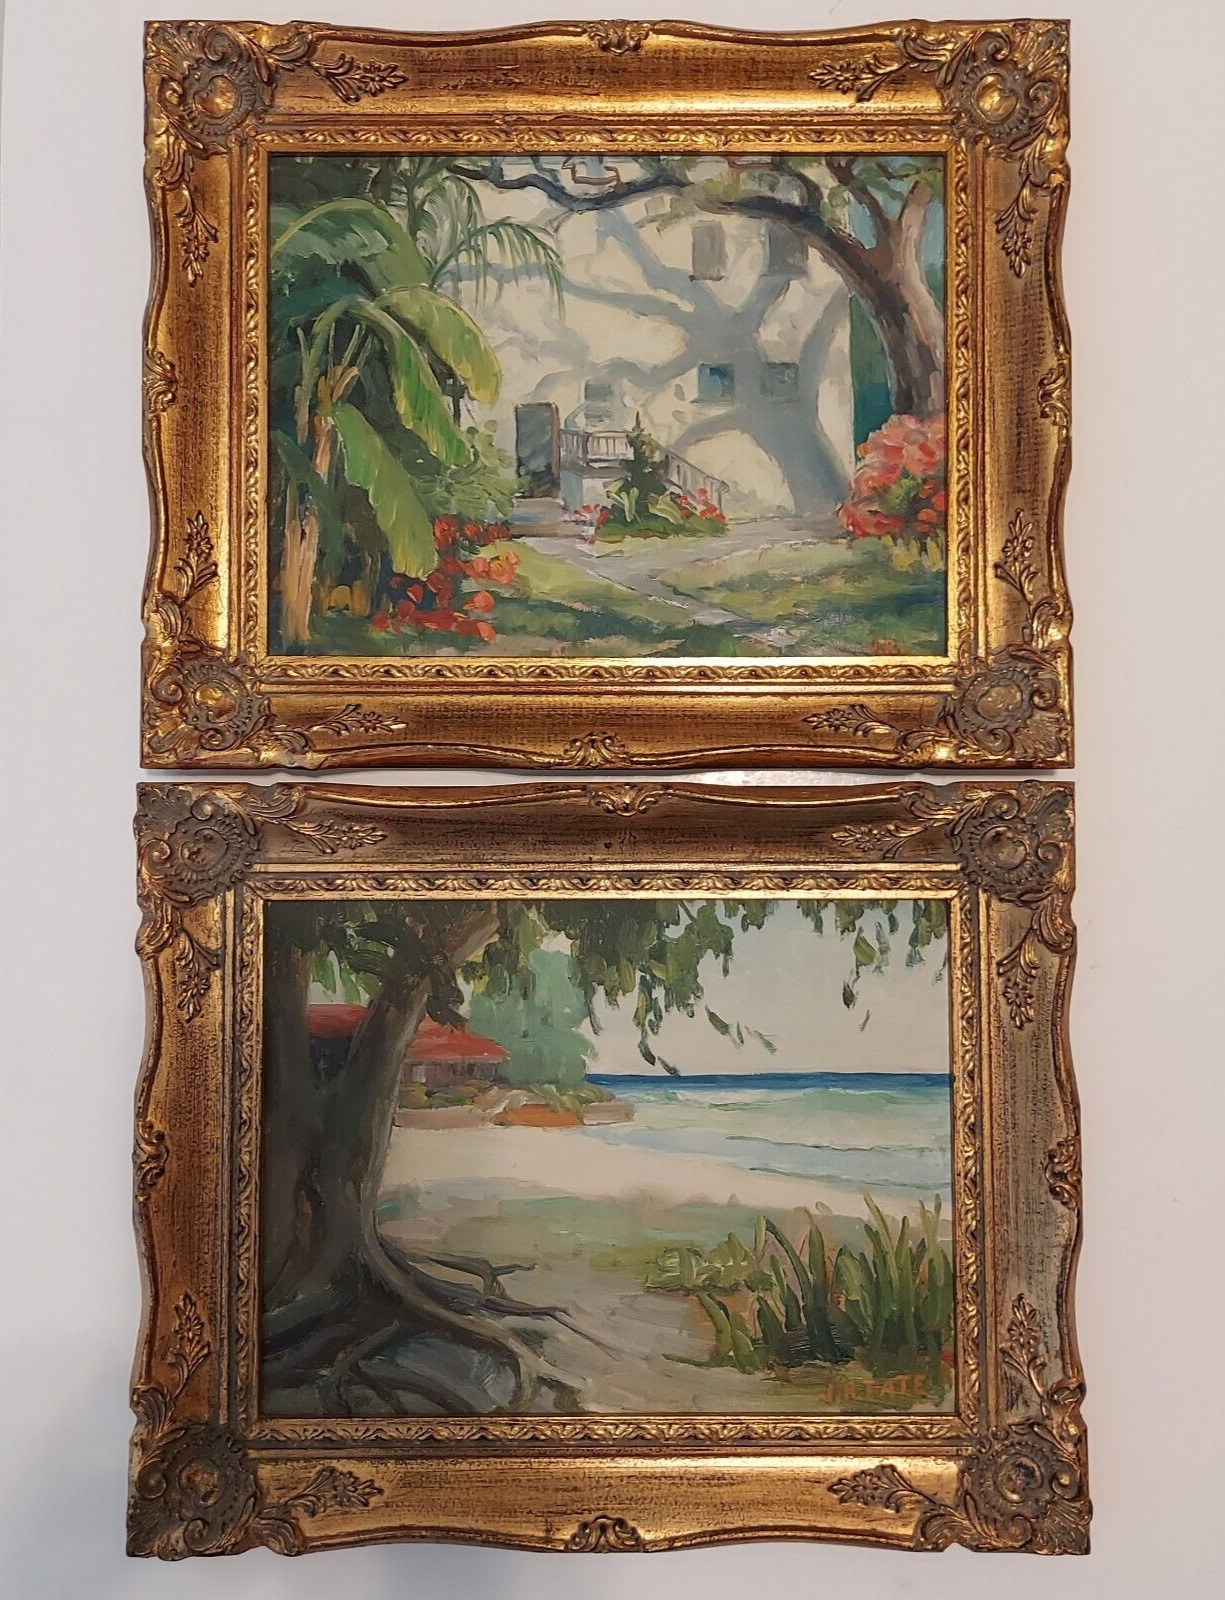 2 Vintage Ornate Gold Wood Frames w/ Signed Painting Made in Mexico